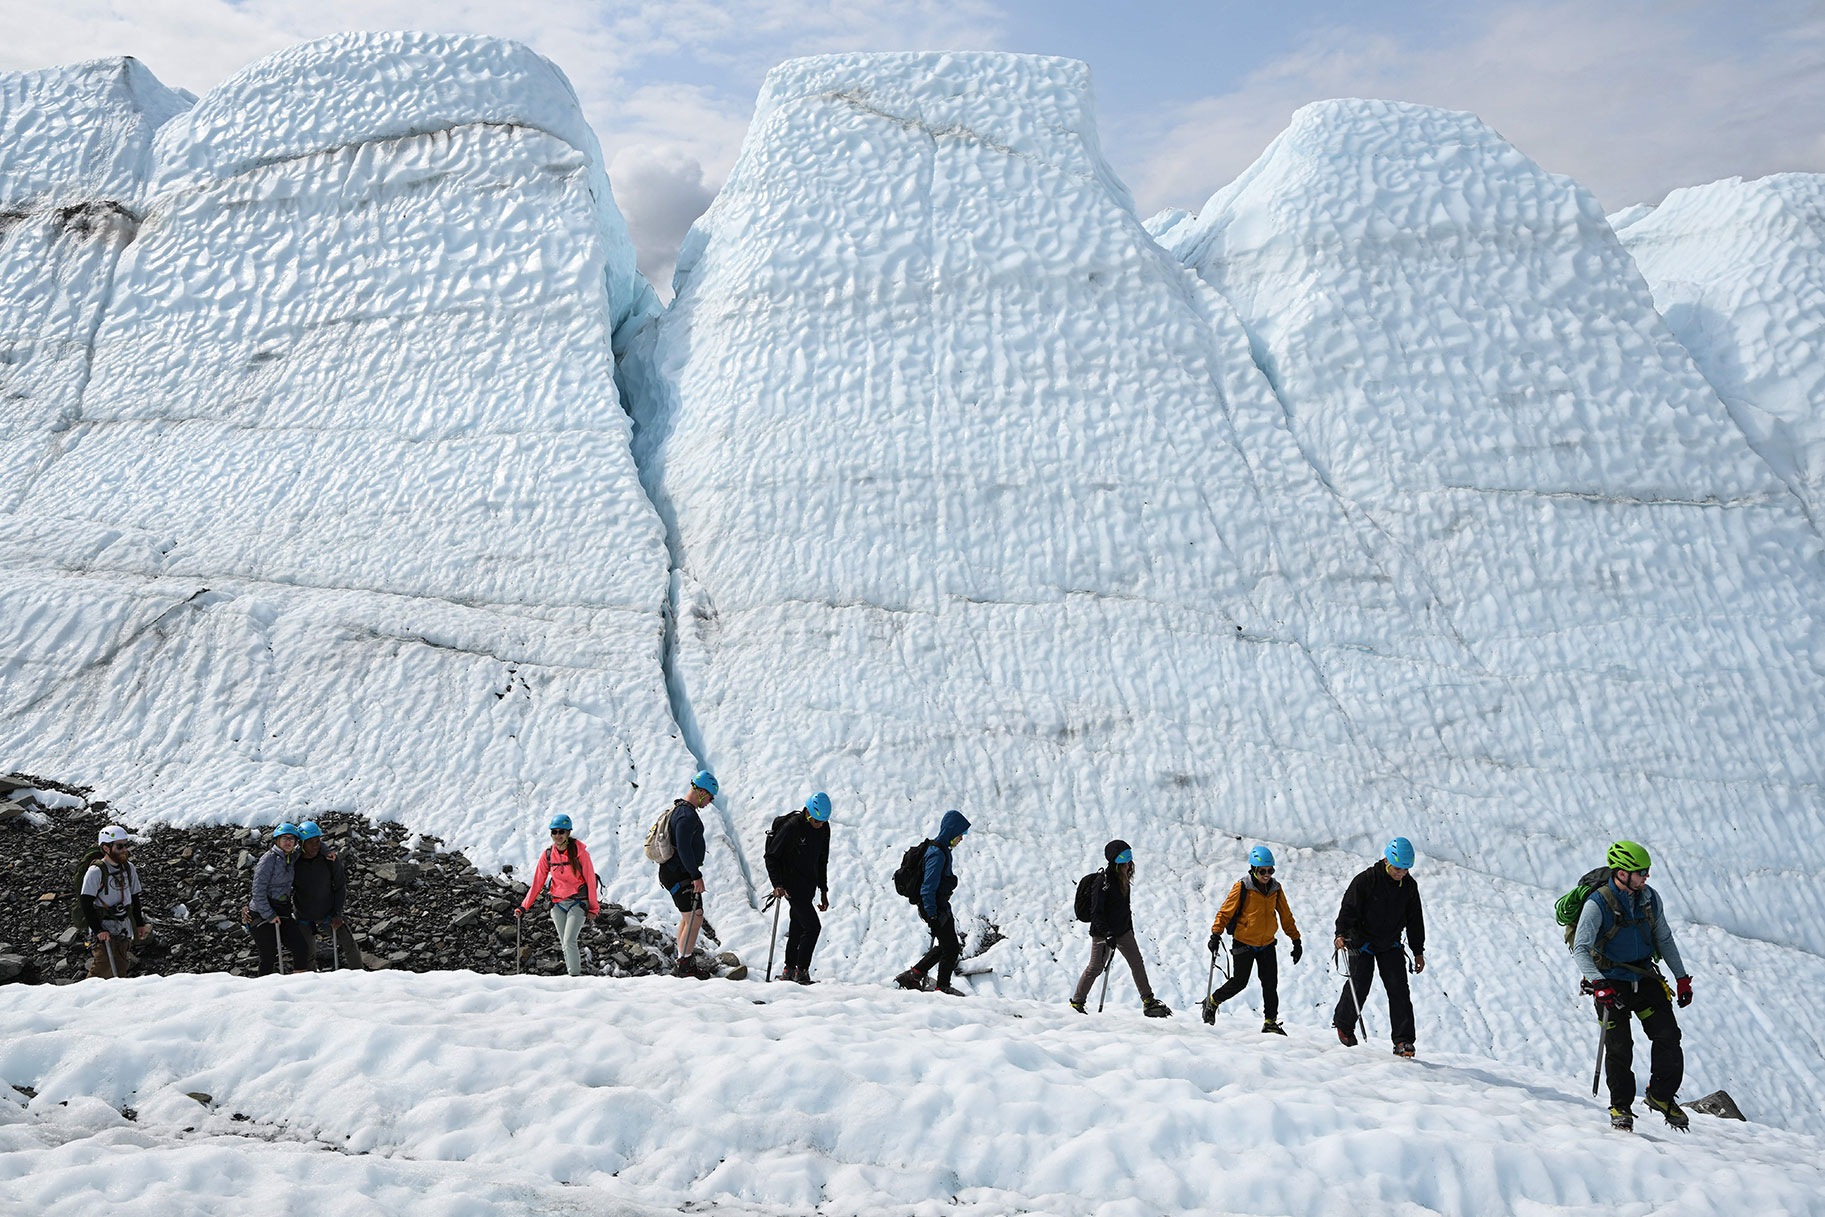 Visitors hike on the ice during a guided tour on the Matanuska Glacier, a 27-mile (43.5kms) long valley glacier feeding water into the Matanuska Rive